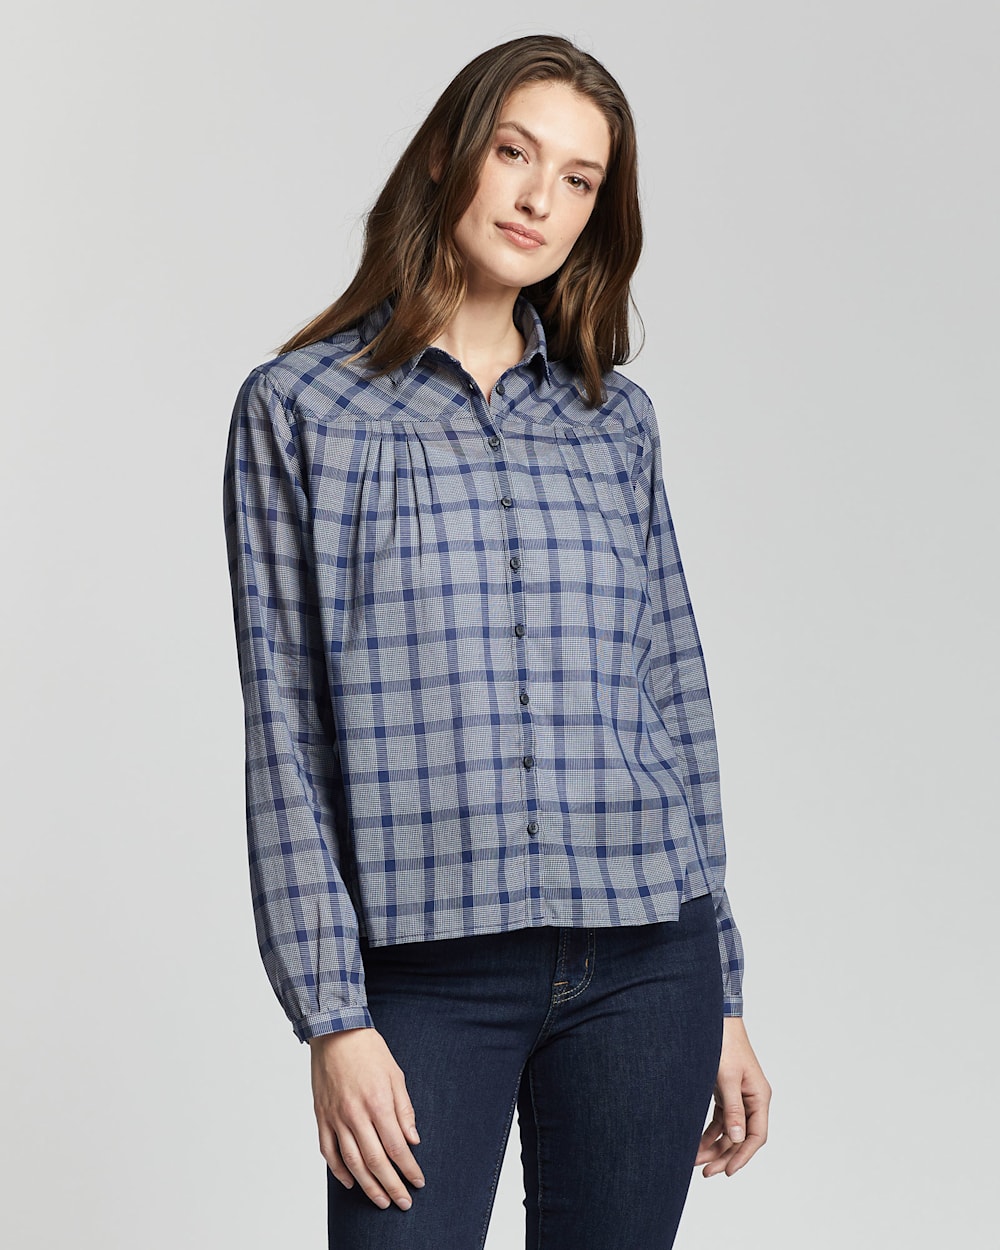 WOMEN'S AIRY COTTON SHIRT IN NAVY/WHITE PLAID image number 1